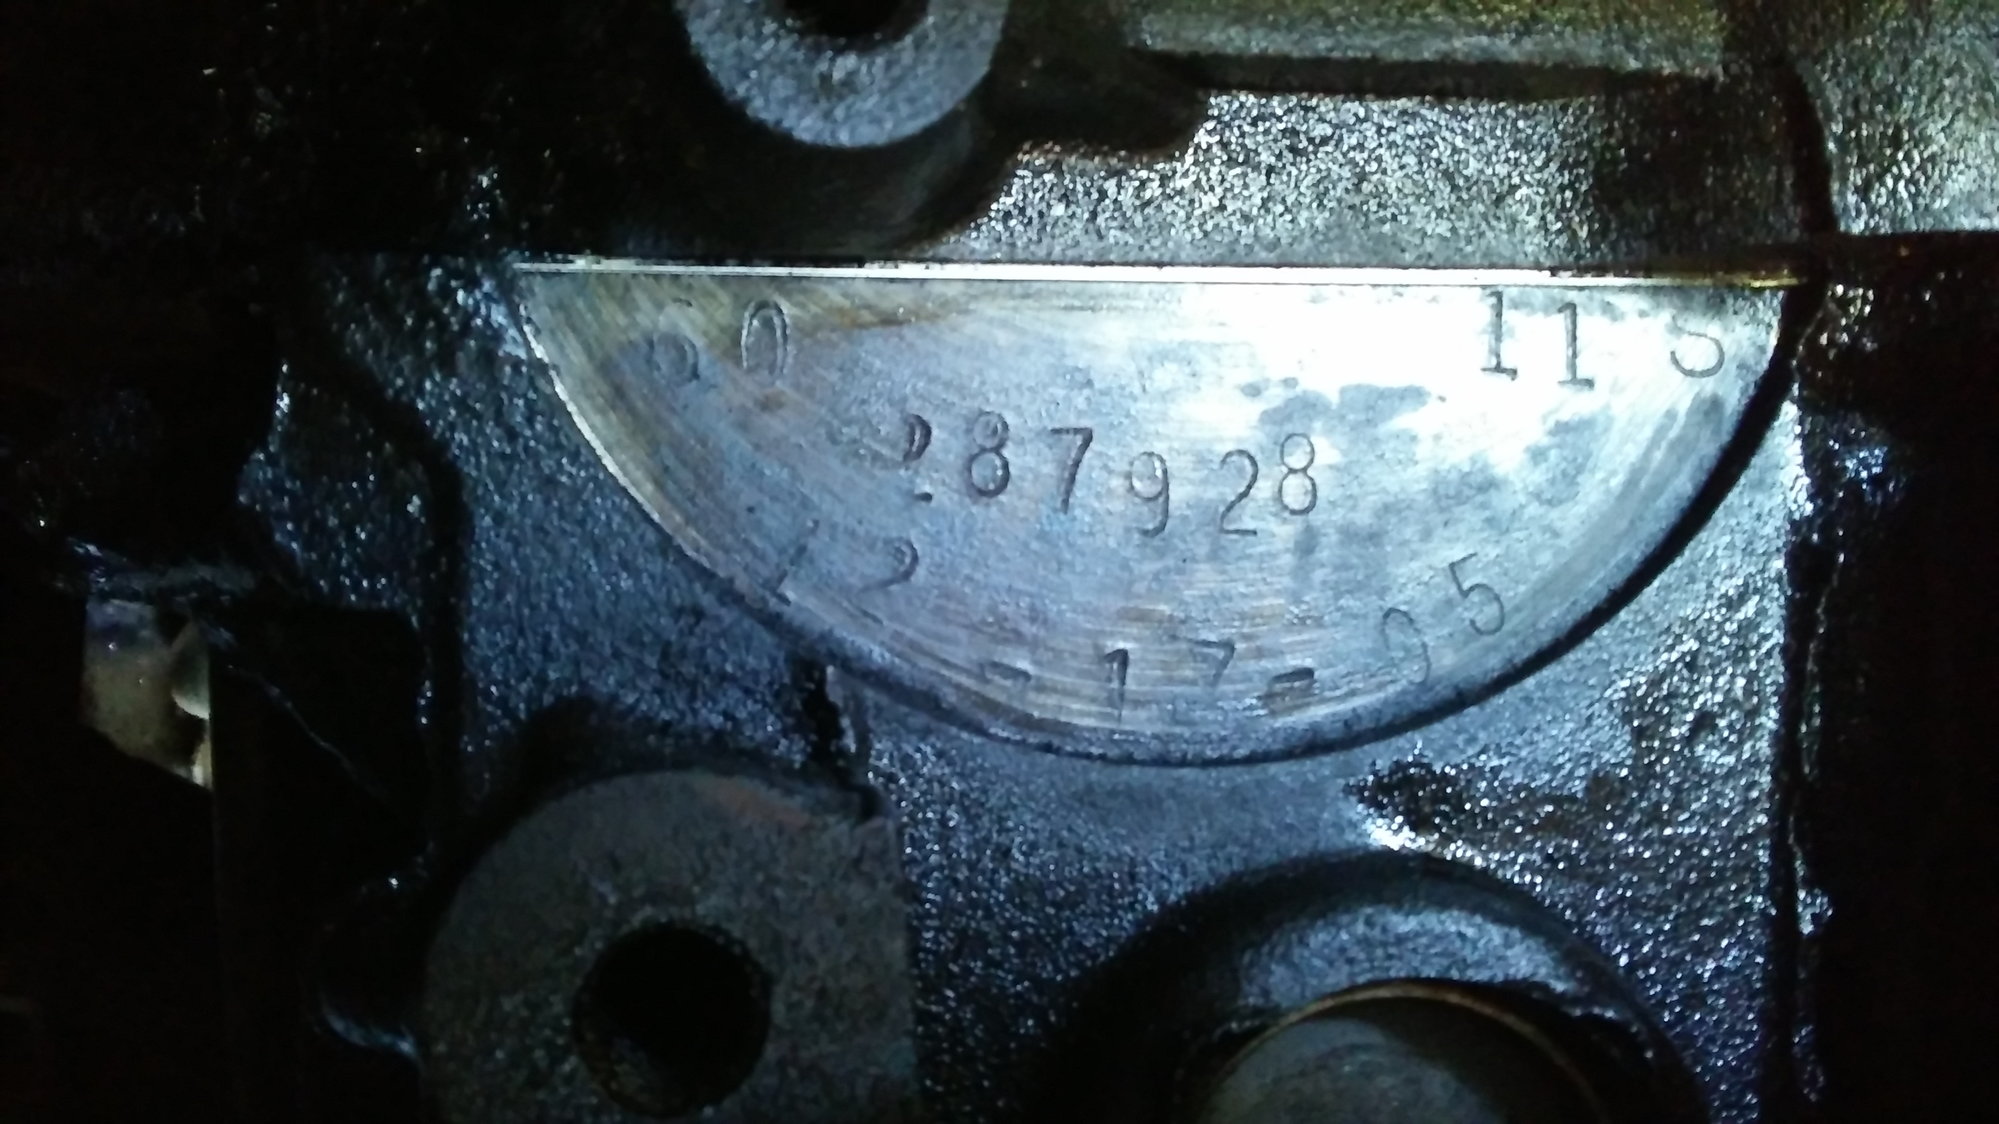 ford 5.4 engine serial number